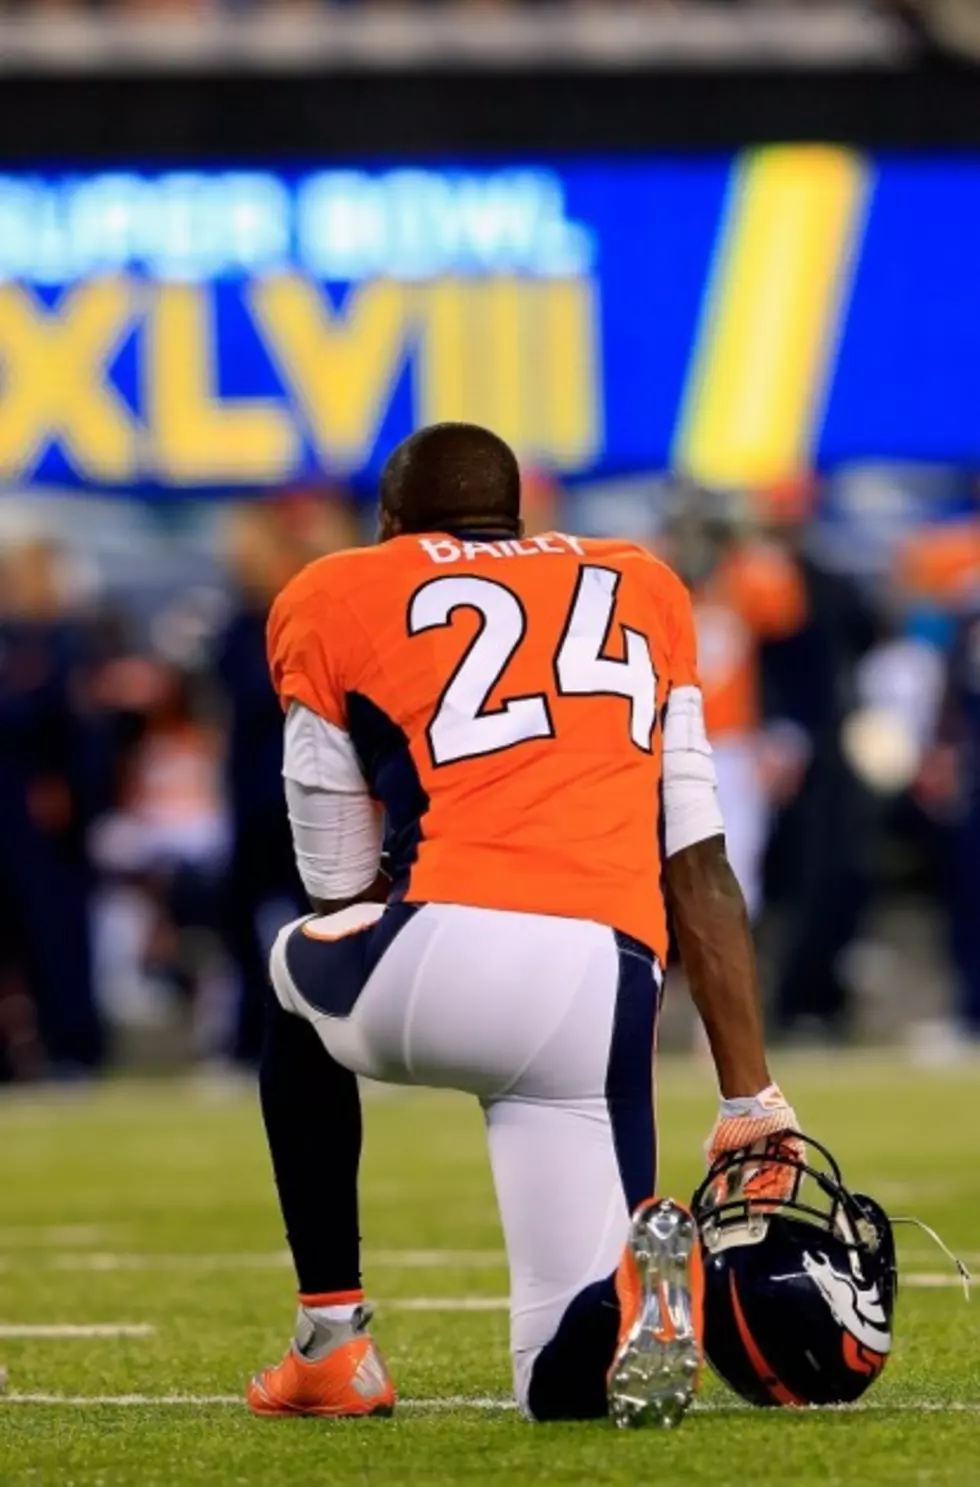 So Long Champ, And Thanks For 10 Great Years With The Broncos